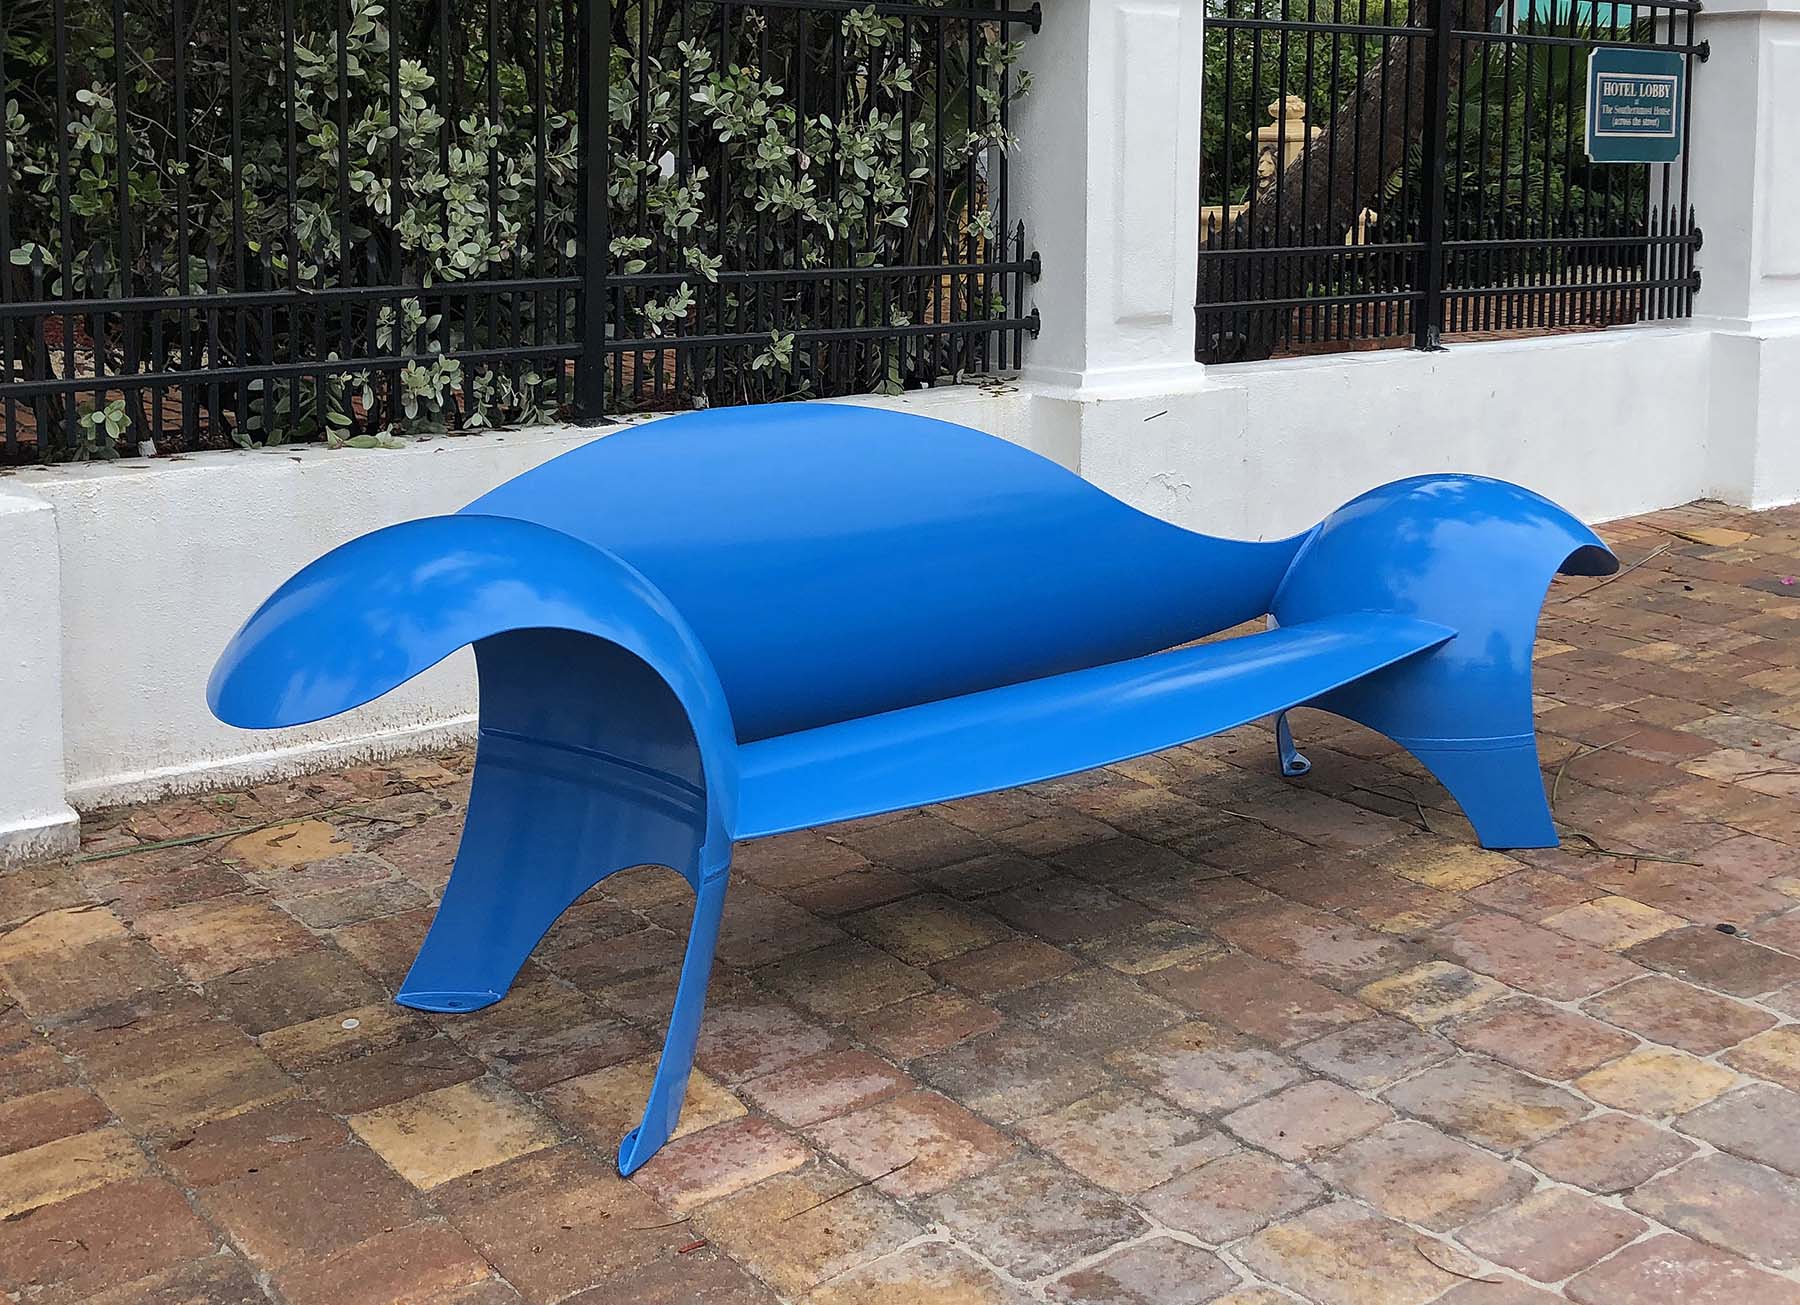 Colin Selig, Outdoor Metal Seating (2021). Repurposed scrap propane tank. ©Colin Selig 2021. Courtesy of the artist.